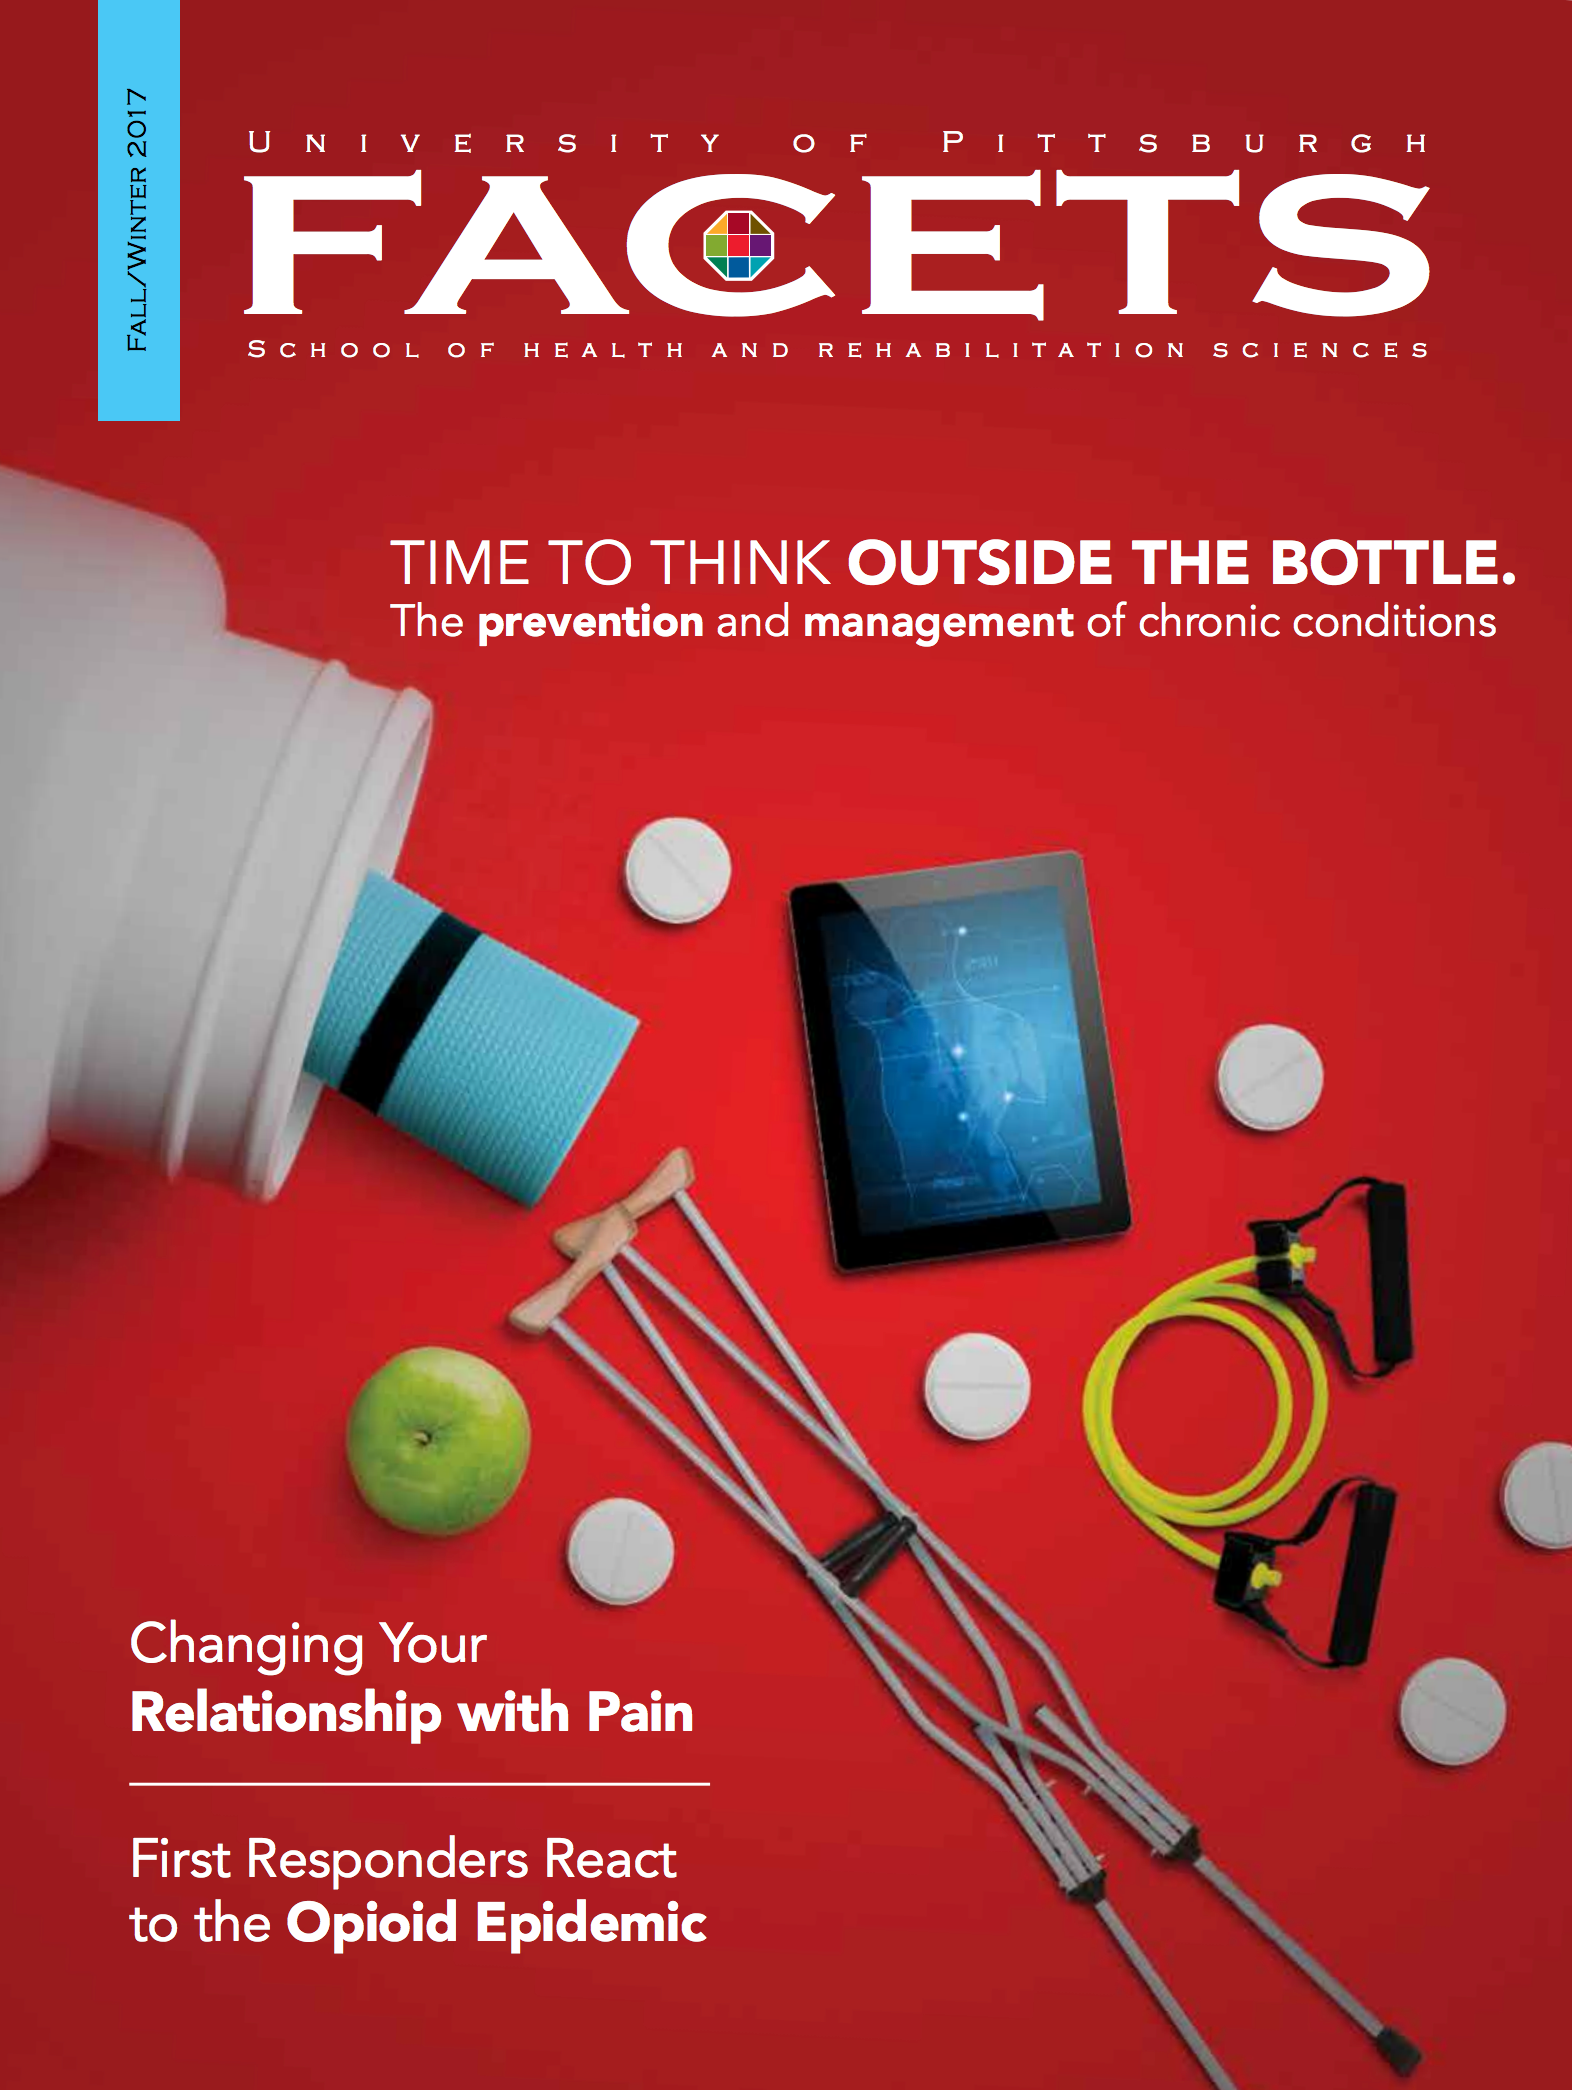 cover of fall/winter facets: red background with a pill bottle spilling out various pills and medical items